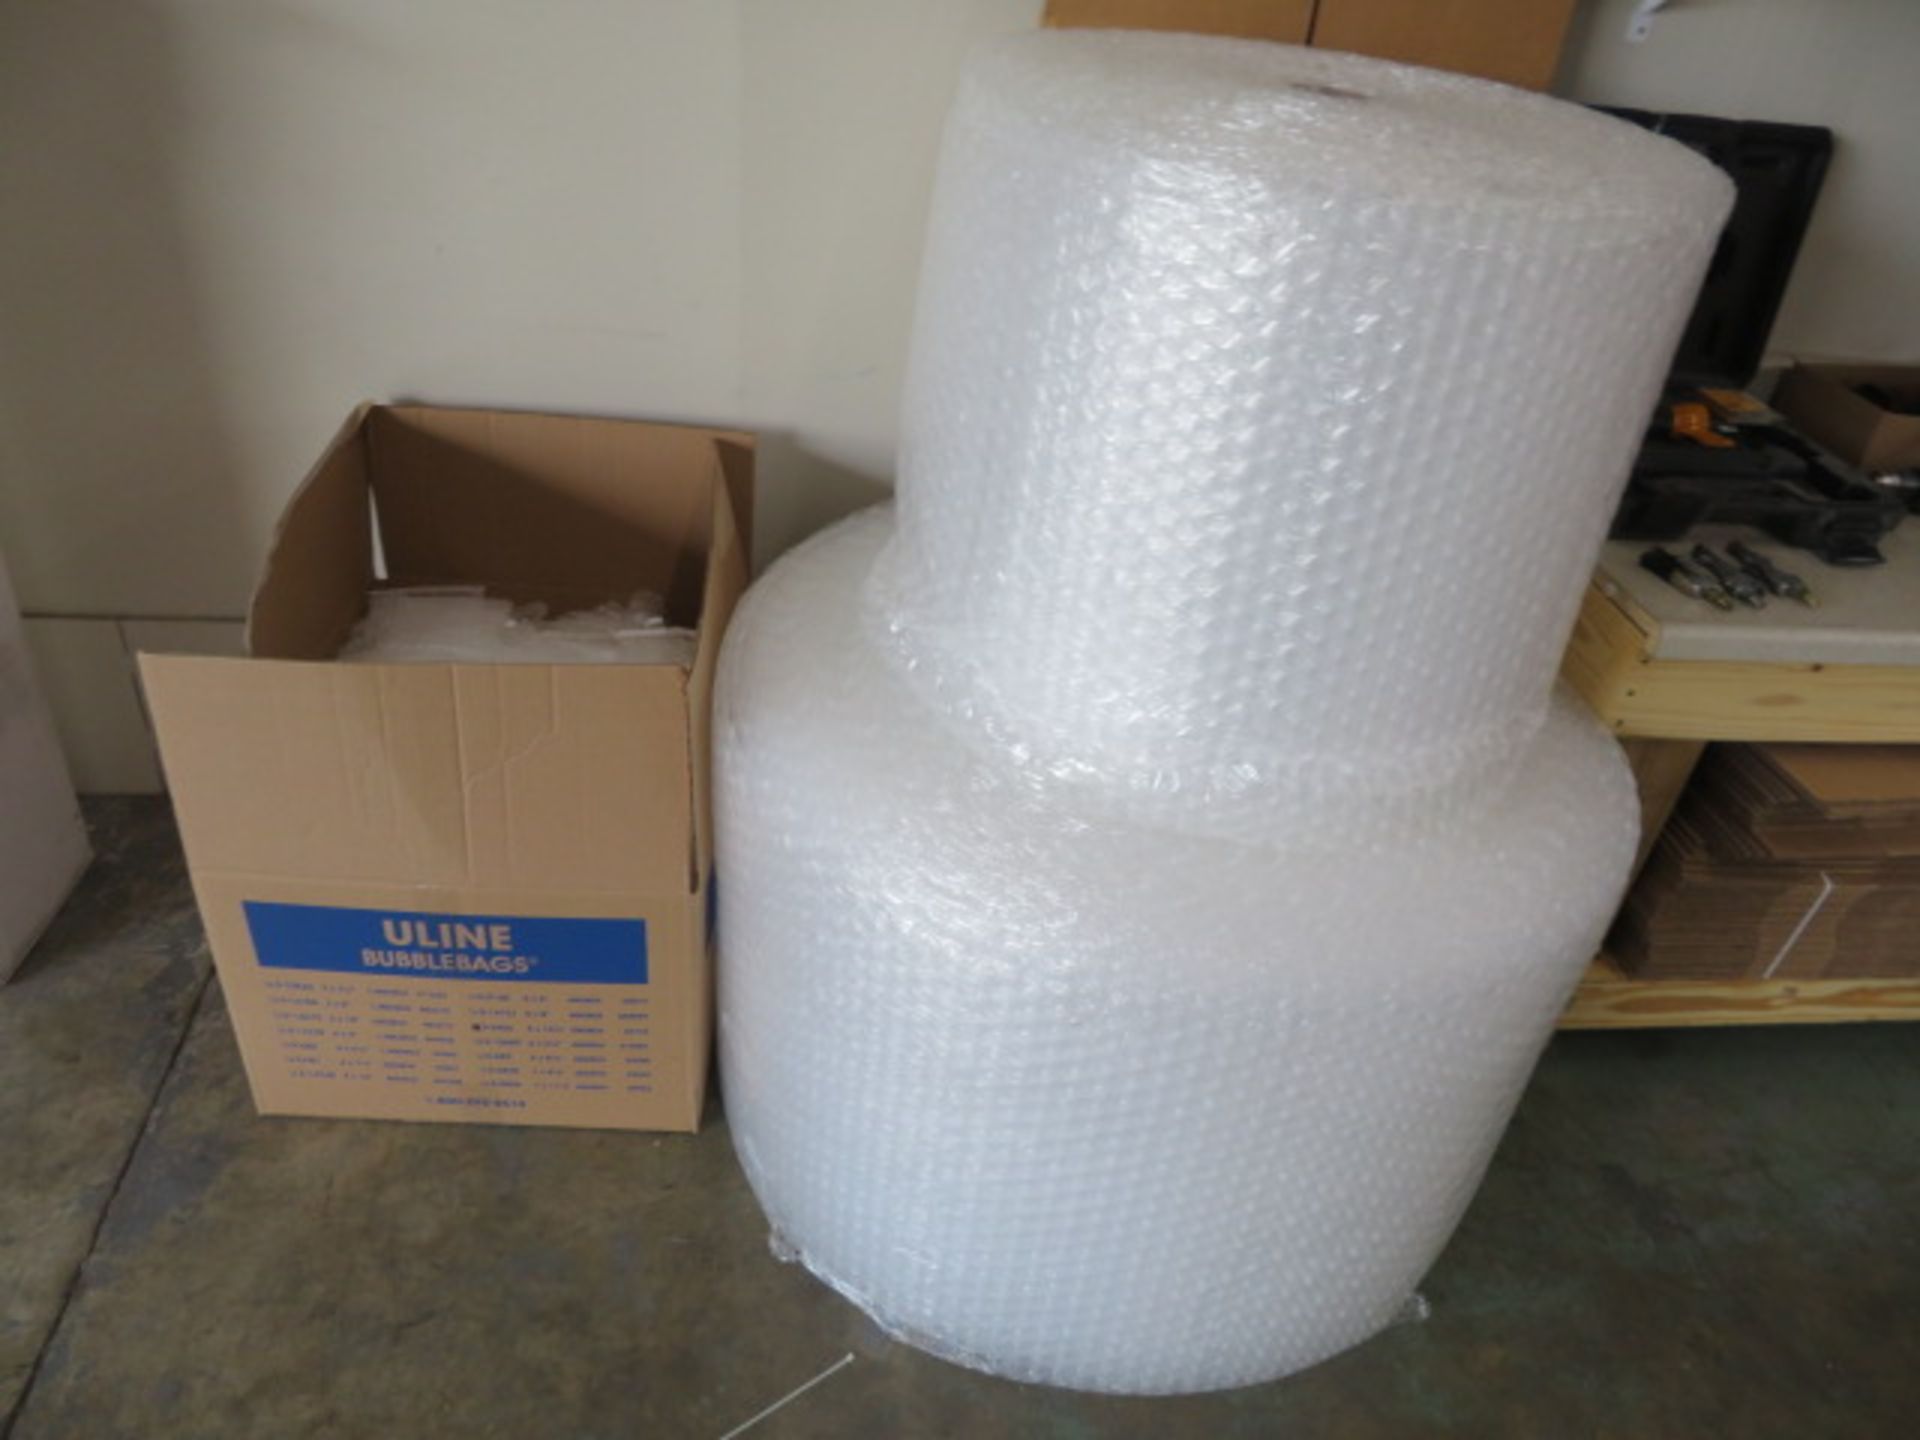 ASSORTED CORRUGATED AND BUBBLE WRAP PACKAGING AND SUPPLIES - Image 2 of 4